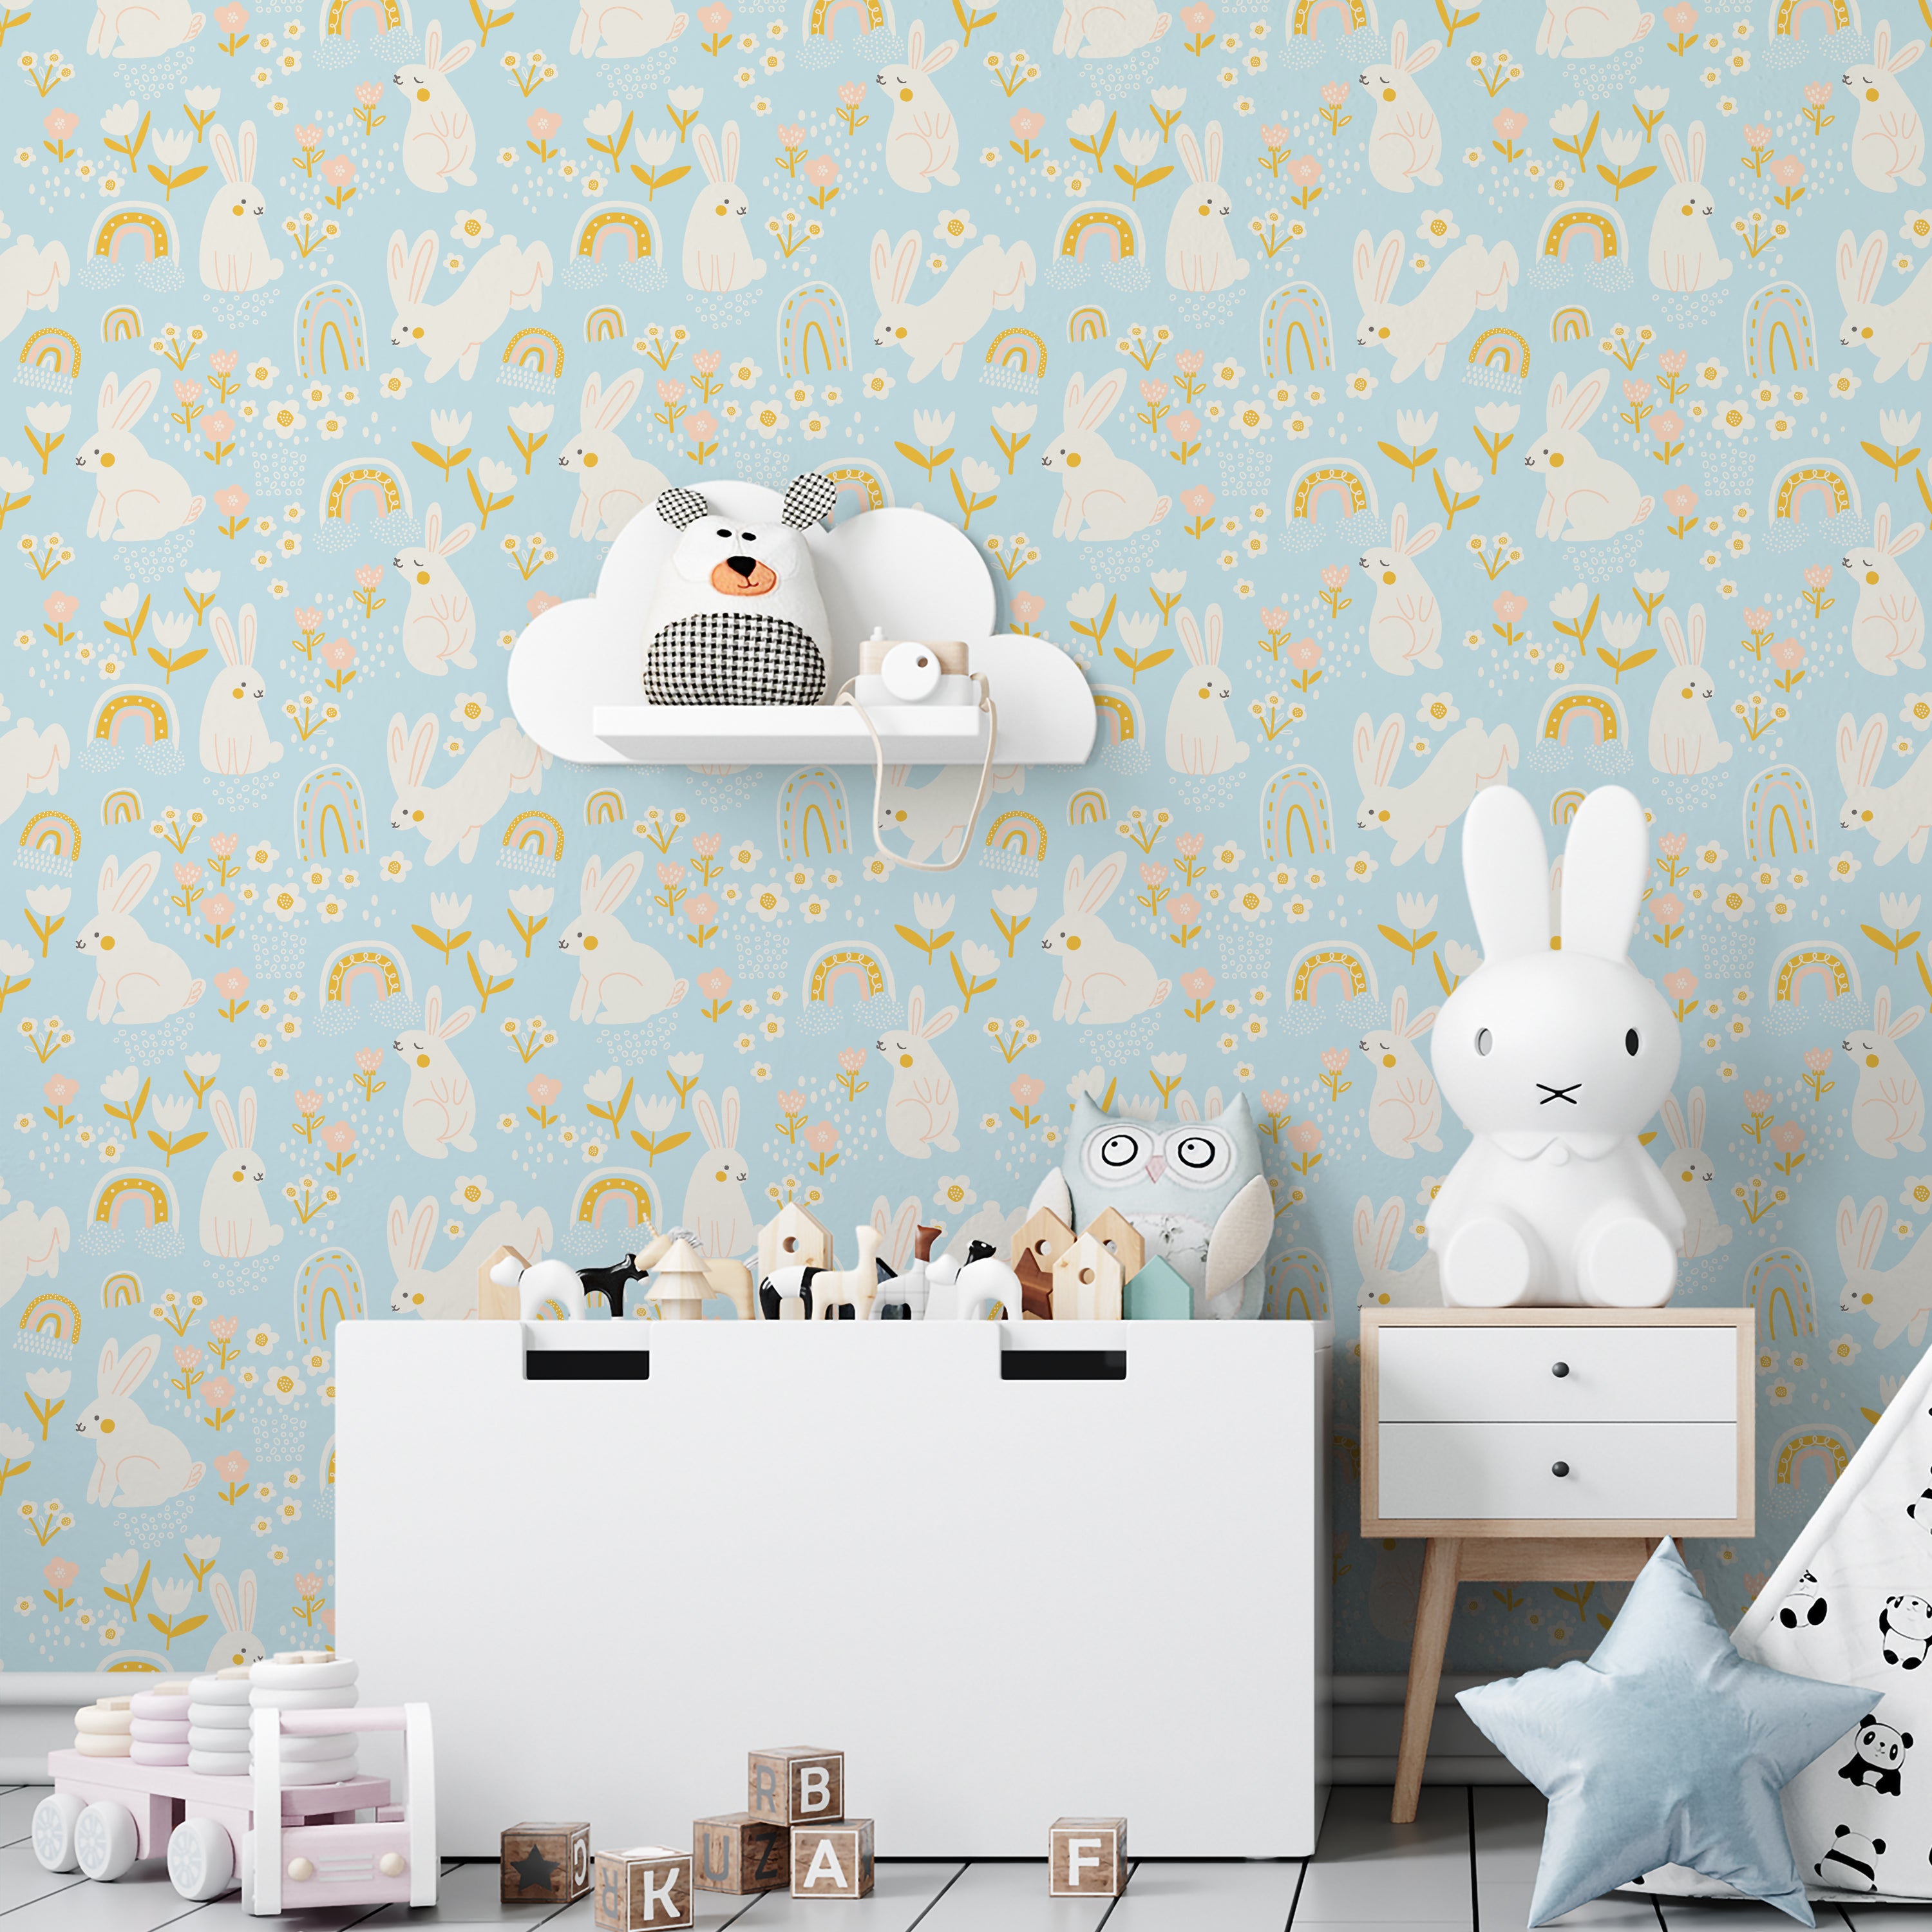 A nursery room showcasing a wall covered in light blue wallpaper featuring white rabbits and small rainbows, accompanied by child-friendly decor like toy shelves and plush animals